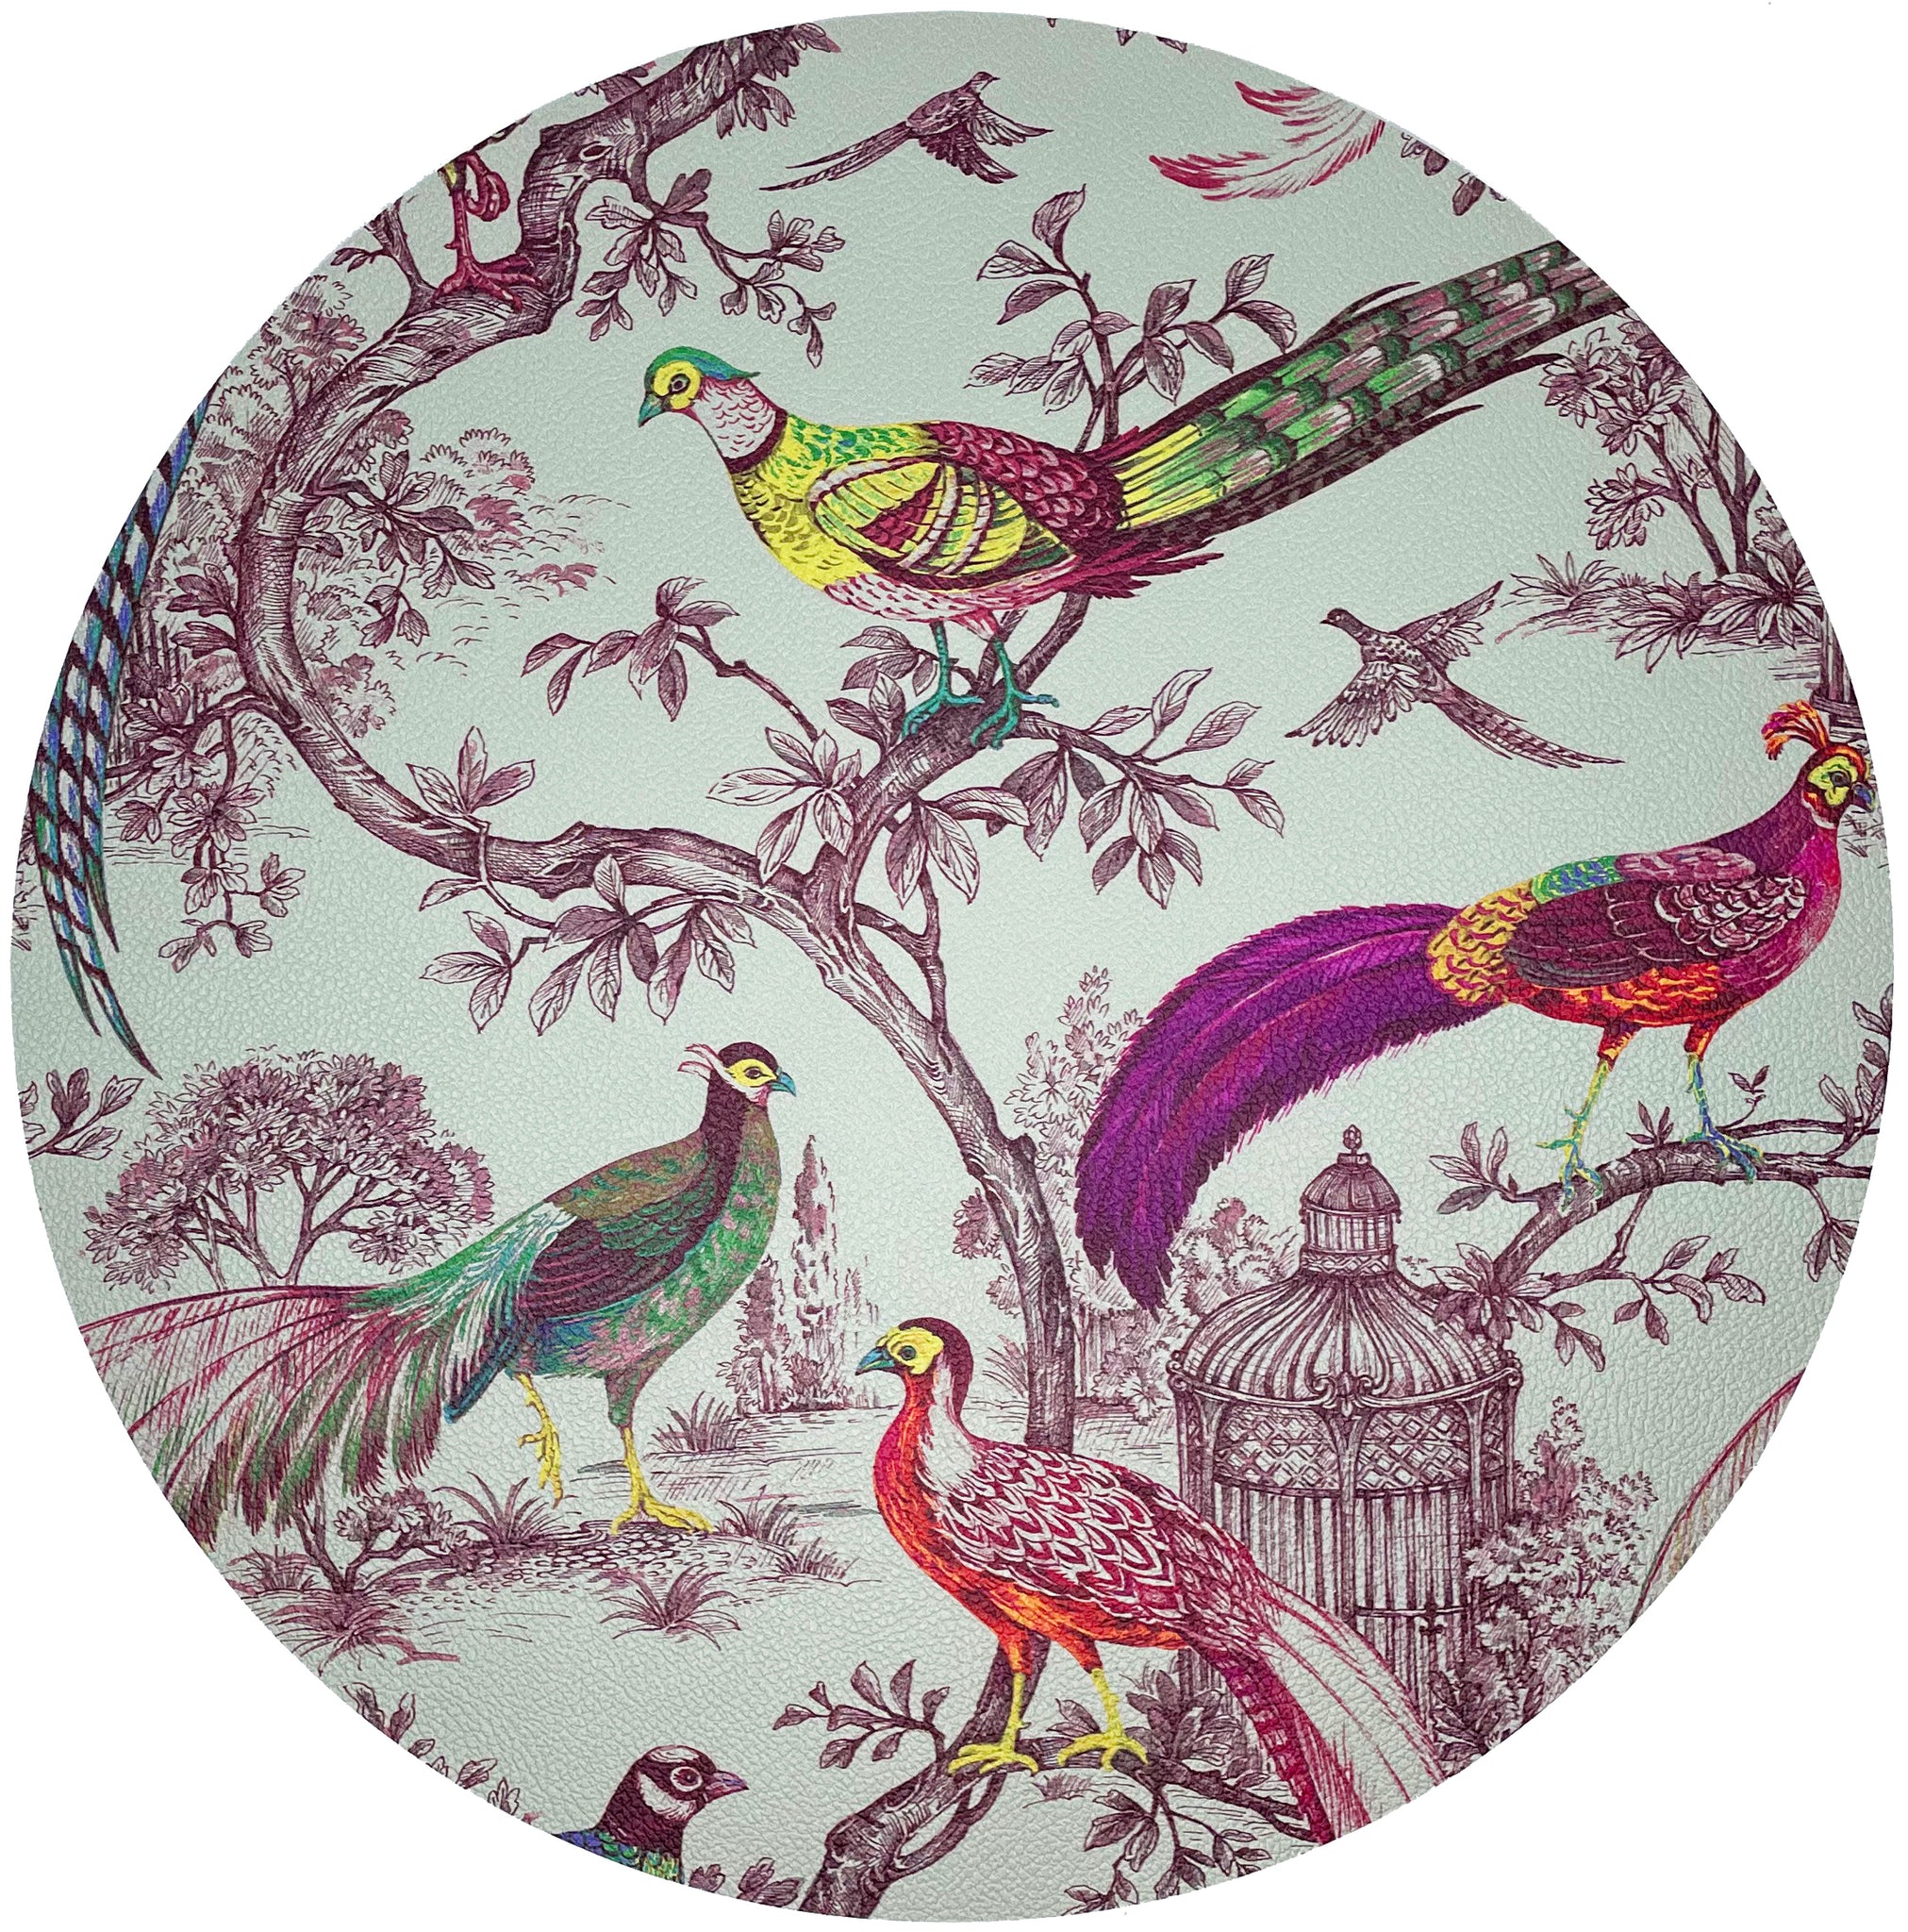 Pheasant Fall Sauvage Meadow 16" Round Pebble Placemat, Set of 4